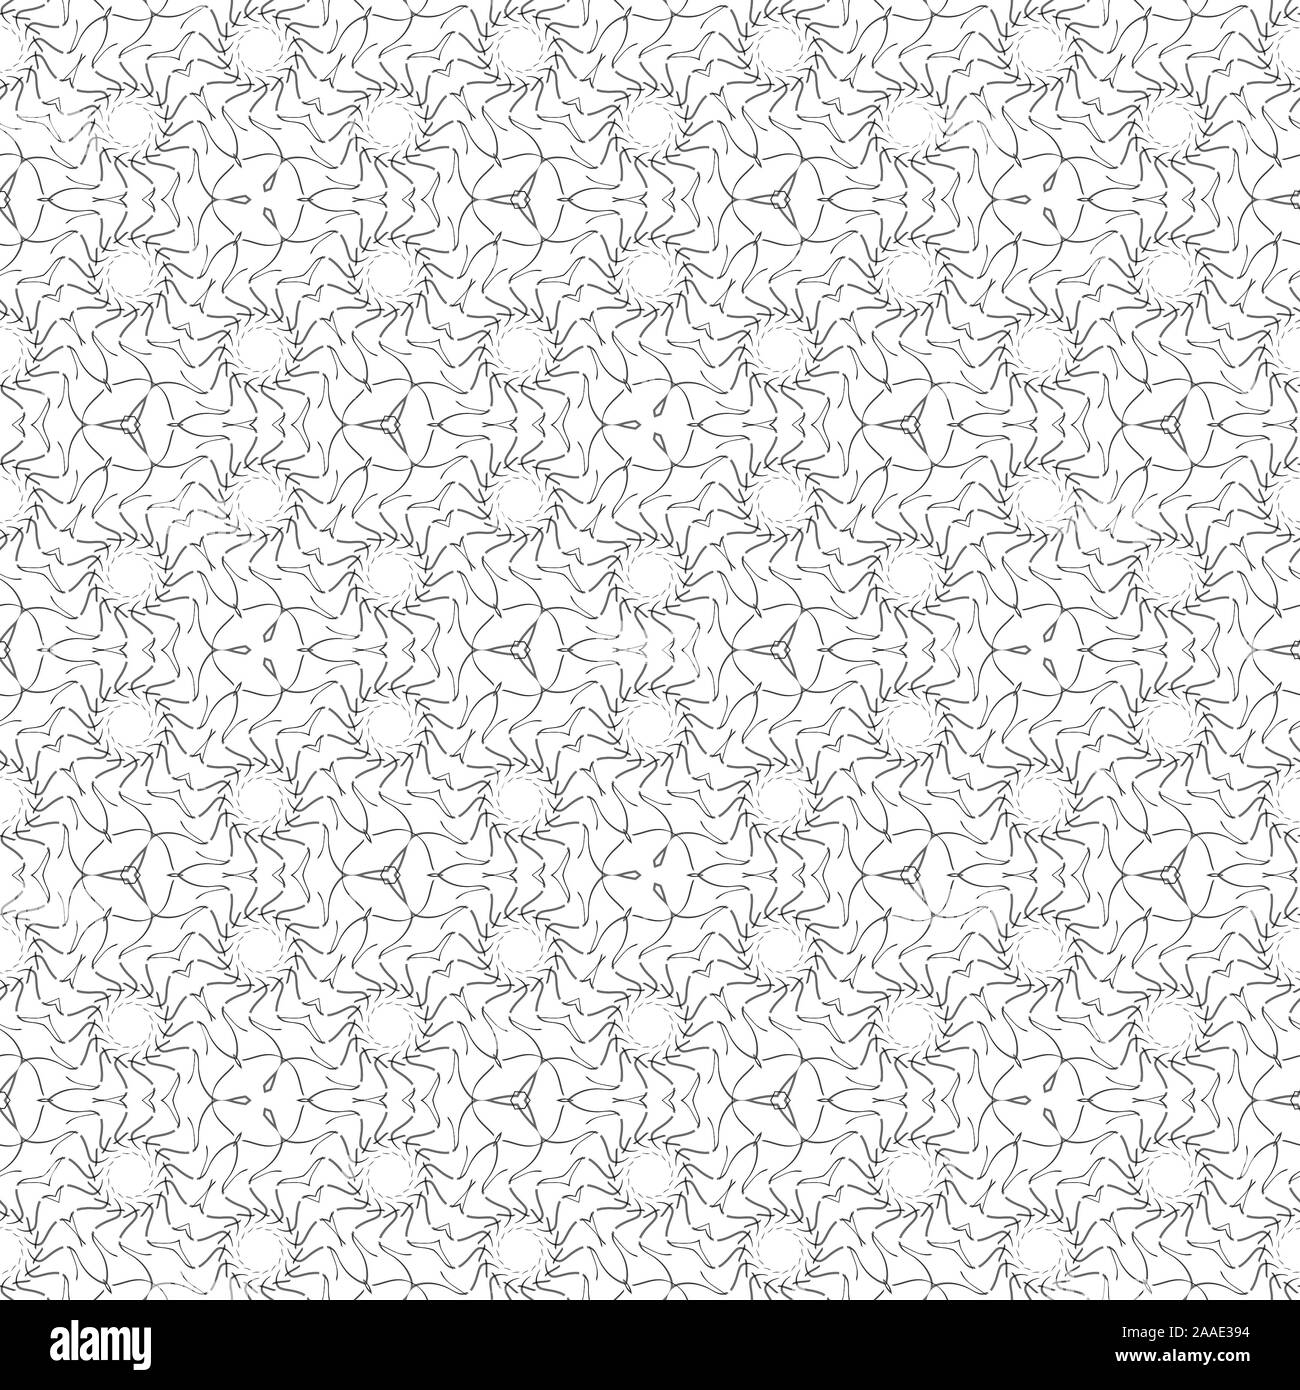 WHITE ABSTRACT BACKGROUND PATTERNS Stock Photo